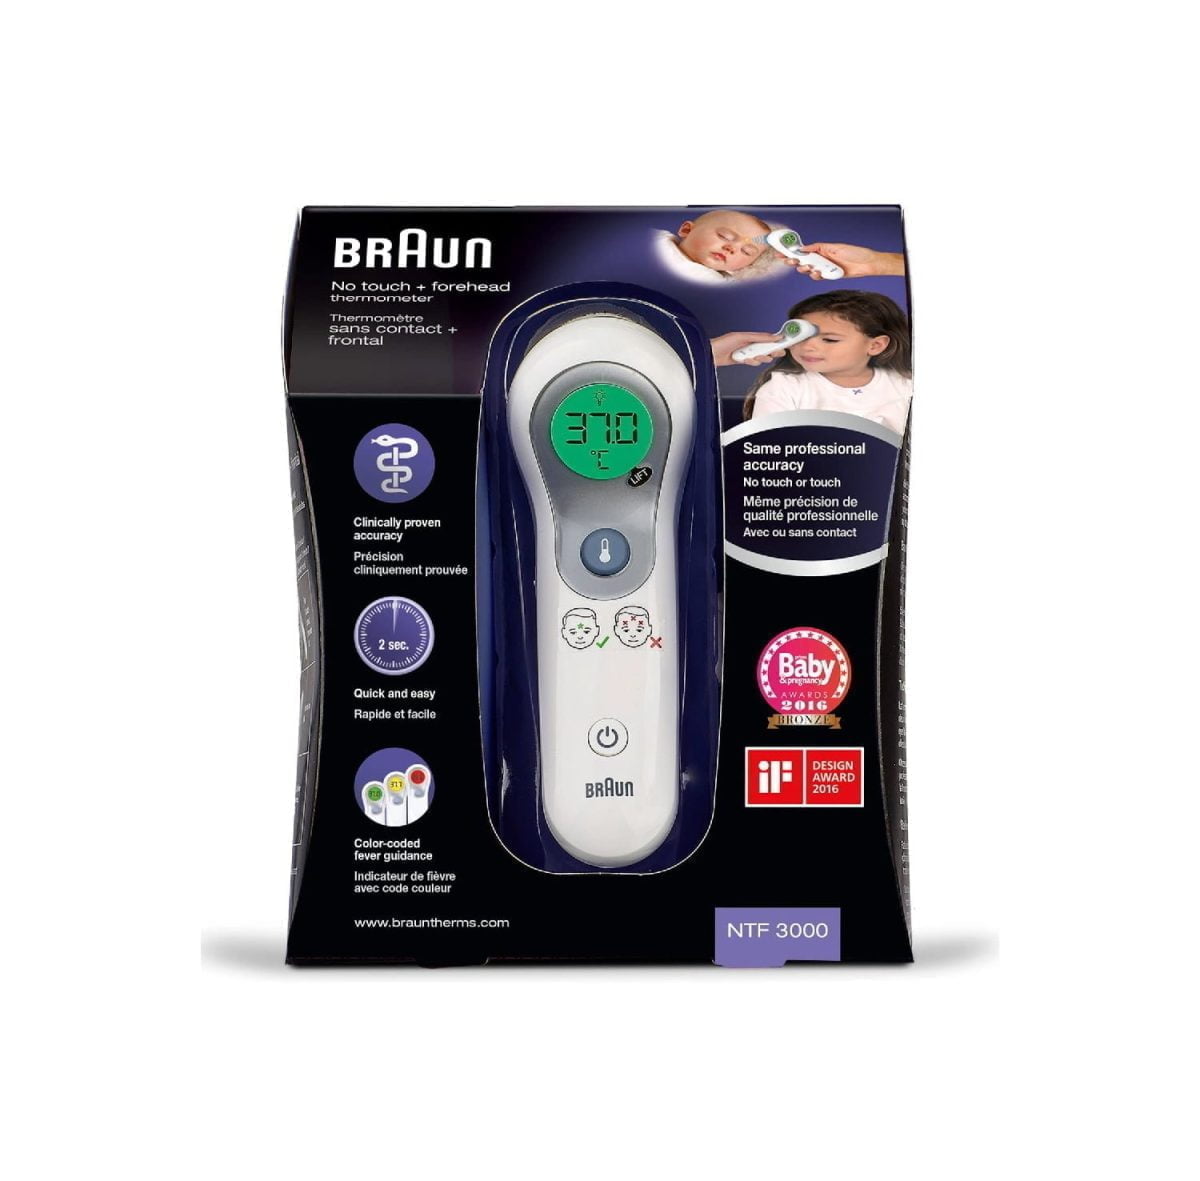 Lablab8 06 Braun &Lt;Div Class=&Quot;Product Attribute Overview&Quot;&Gt; &Lt;Div Class=&Quot;Value&Quot;&Gt; &Lt;Ul&Gt; &Lt;Li&Gt;Quick And Convenient Measurement In Both No Touch And Touch Mode&Lt;/Li&Gt; &Lt;Li&Gt;Colour-Coded Temperature Guidance&Lt;/Li&Gt; &Lt;Li&Gt;Silent Mode&Lt;/Li&Gt; &Lt;/Ul&Gt; [Video Width=&Quot;720&Quot; Height=&Quot;404&Quot; Mp4=&Quot;Https://Lablaab.com/Wp-Content/Uploads/2020/05/B1T8F7T-Ias.mp4&Quot;][/Video] &Lt;/Div&Gt; &Lt;/Div&Gt; Braun Braun No Touch Plus Touch Forehead Thermometer (Ntf3000)